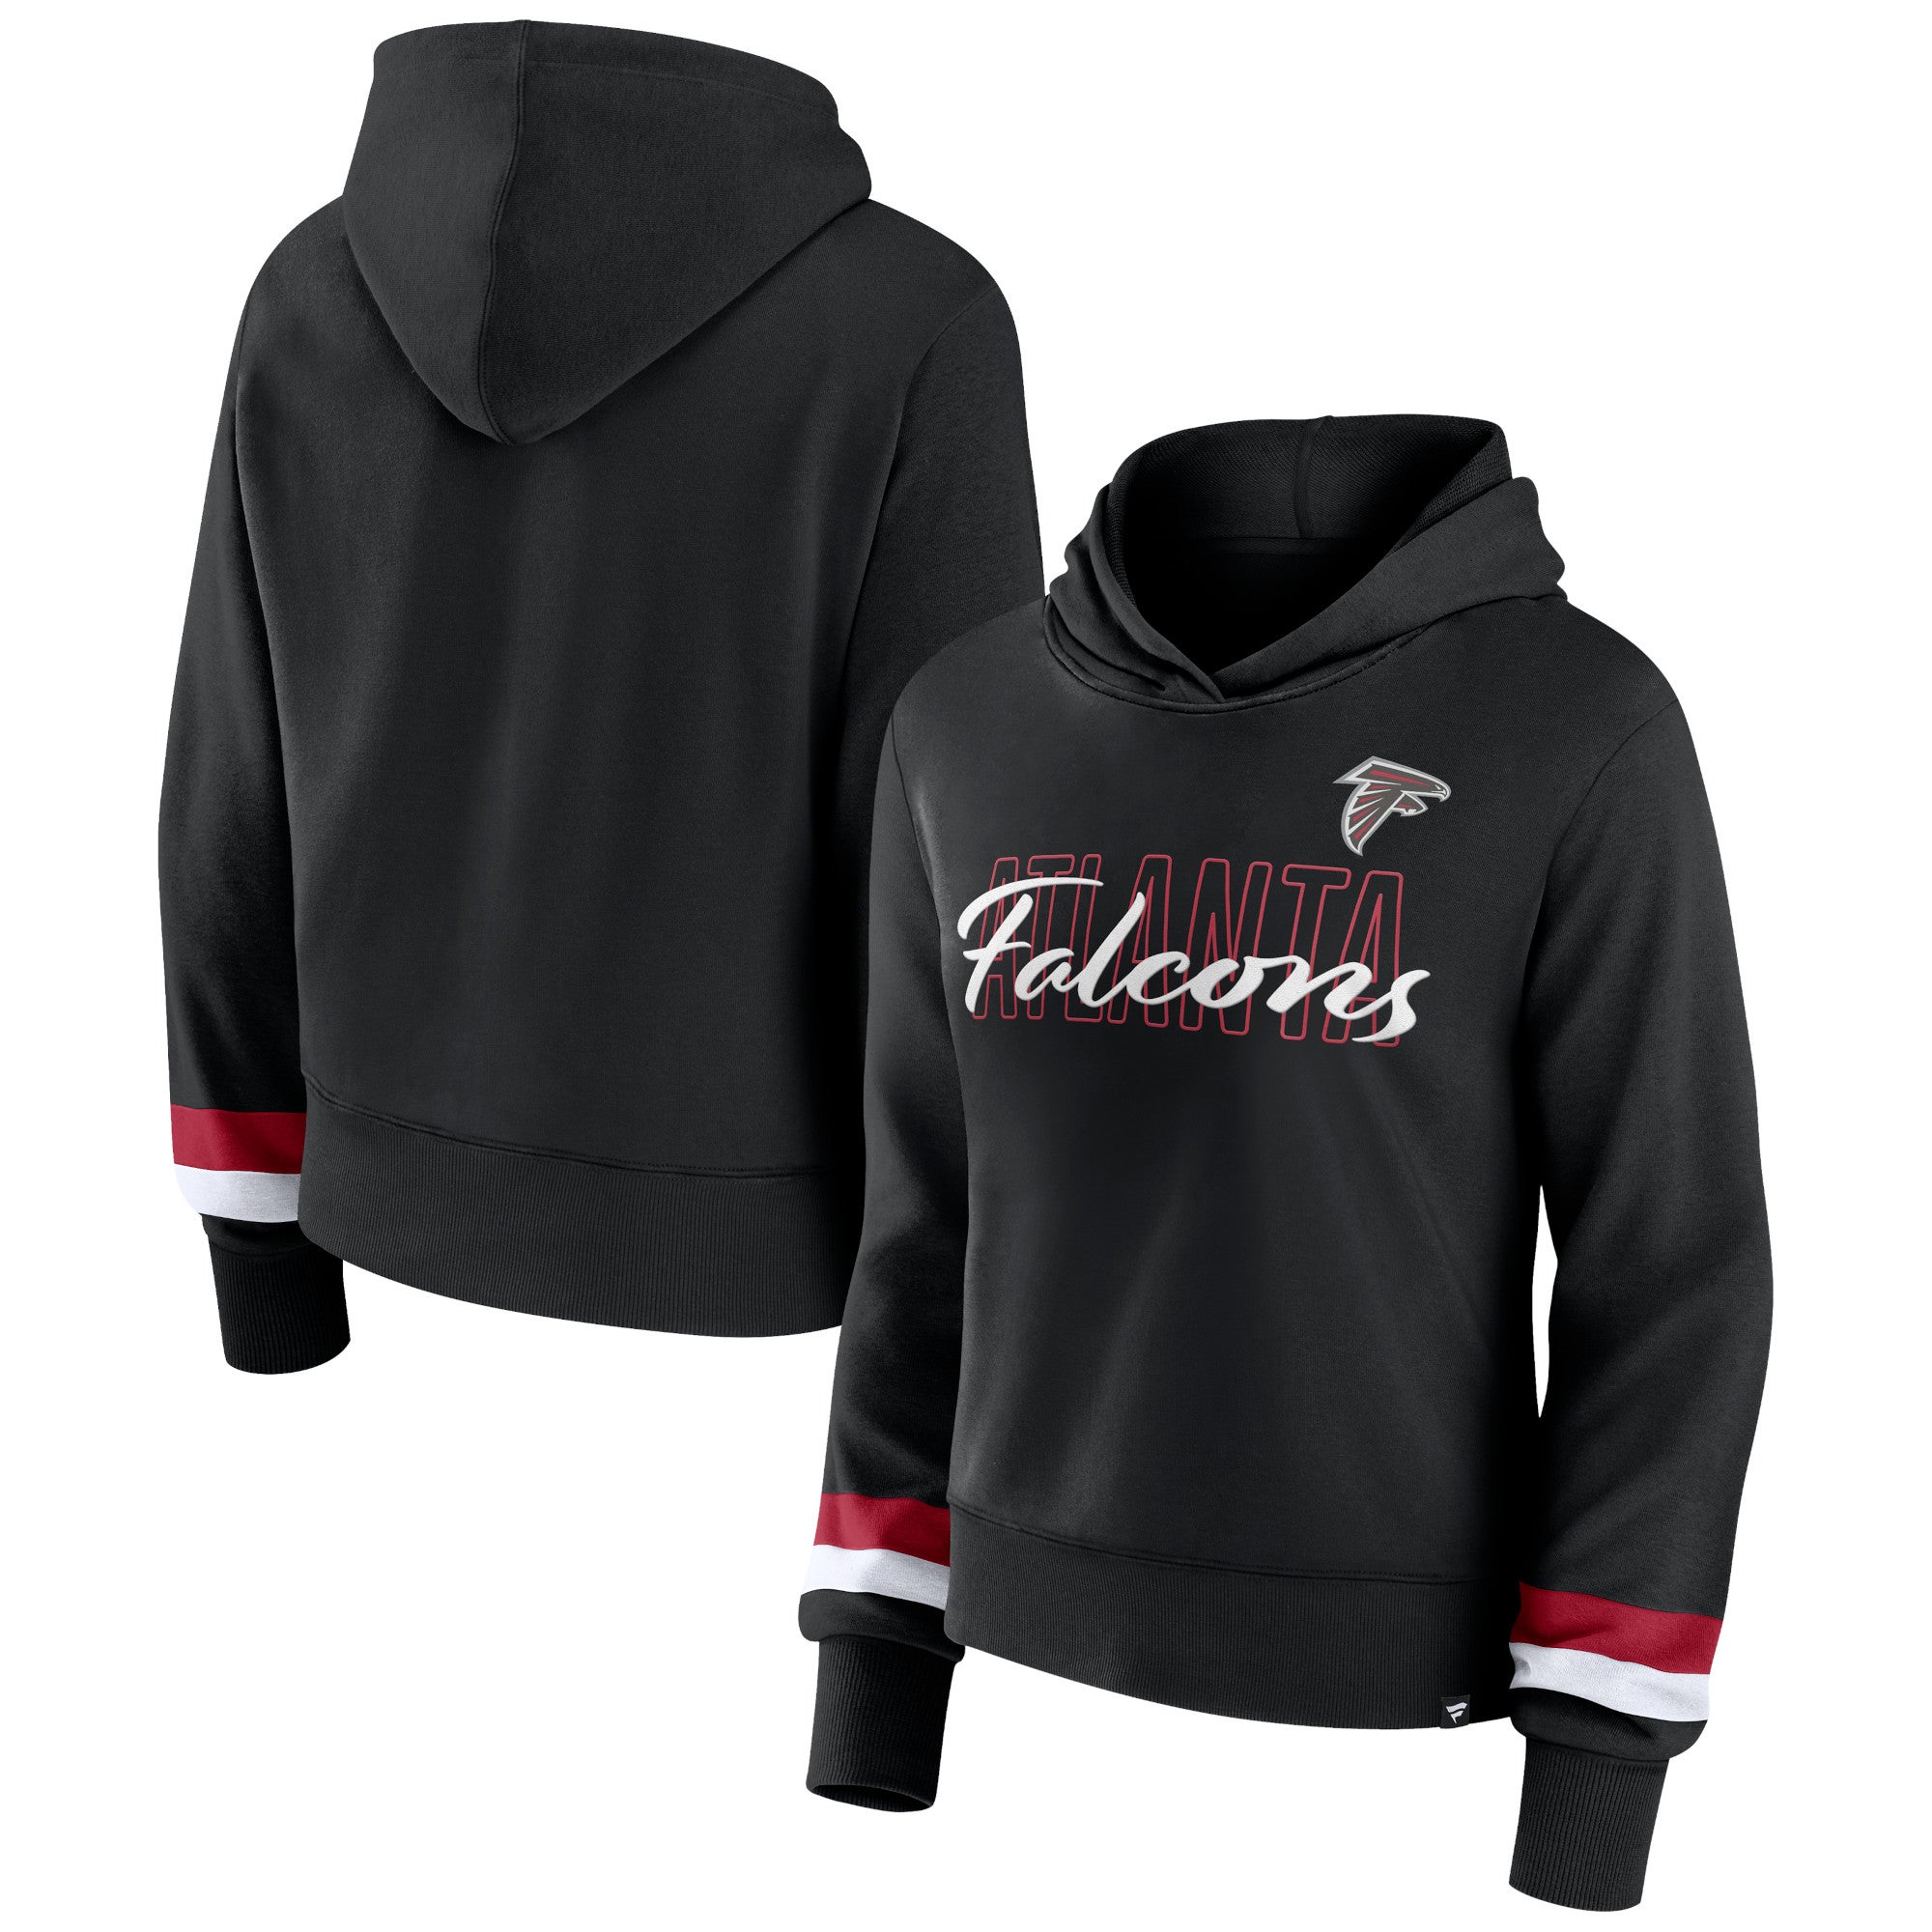 Fanatics Falcons Over Under Pullover Hoodie